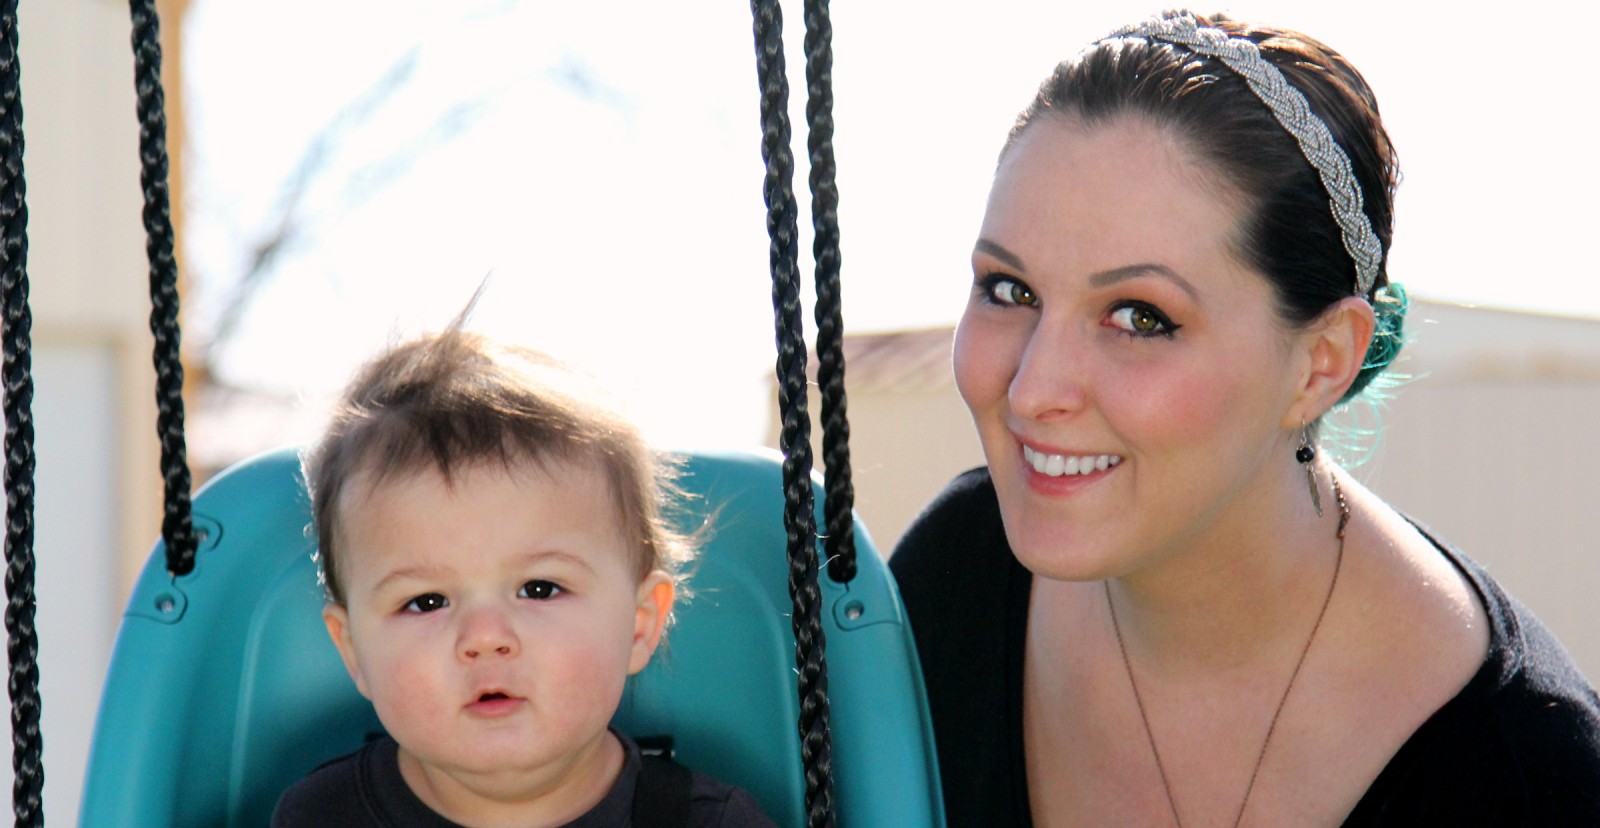 CWI Student Christina Northrop and her son, Milo.